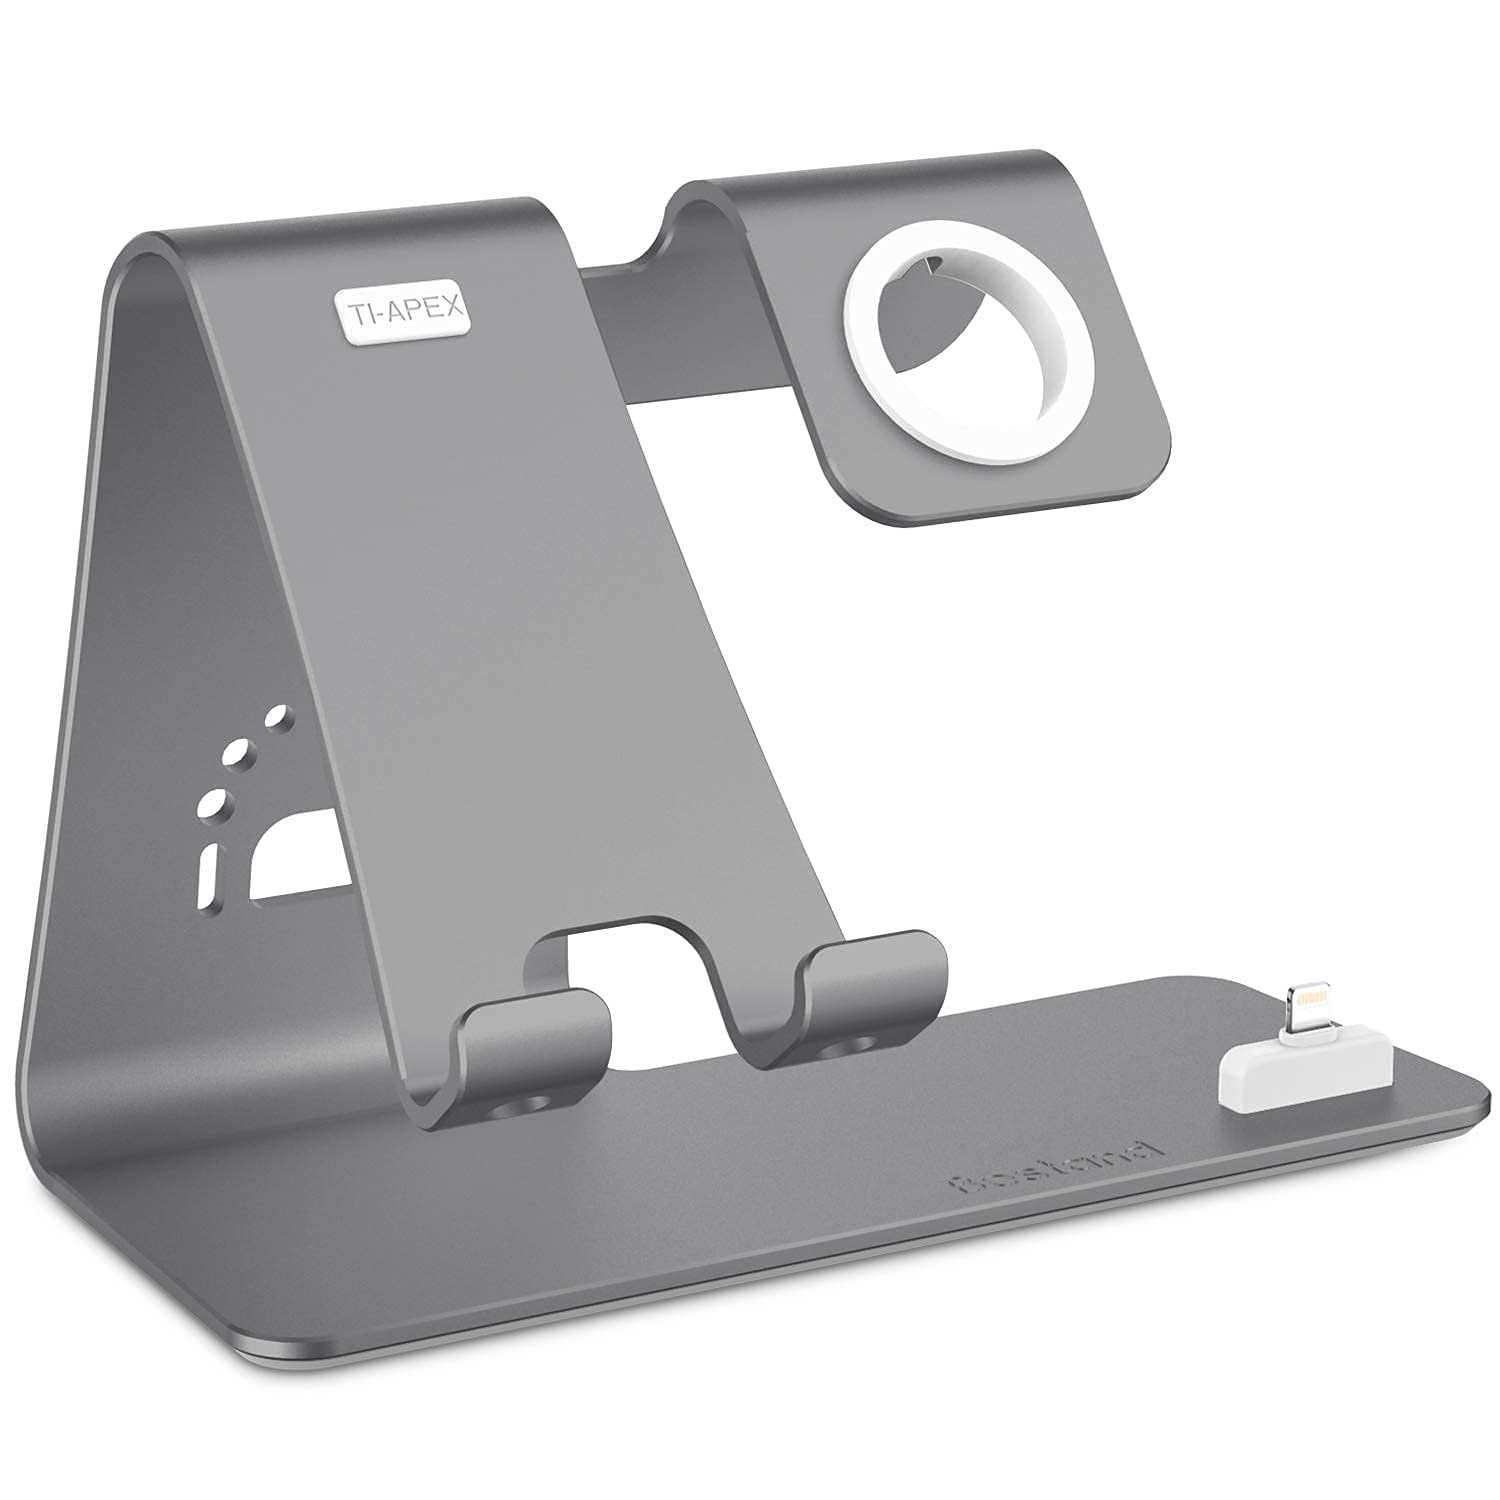 Bestand 3 in 1 Stand Holder for iPhone Mobile Phone iWatch and Charging Stand for Airpods Only, Grey (Patented, Airpods Charging Case NOT Contained)